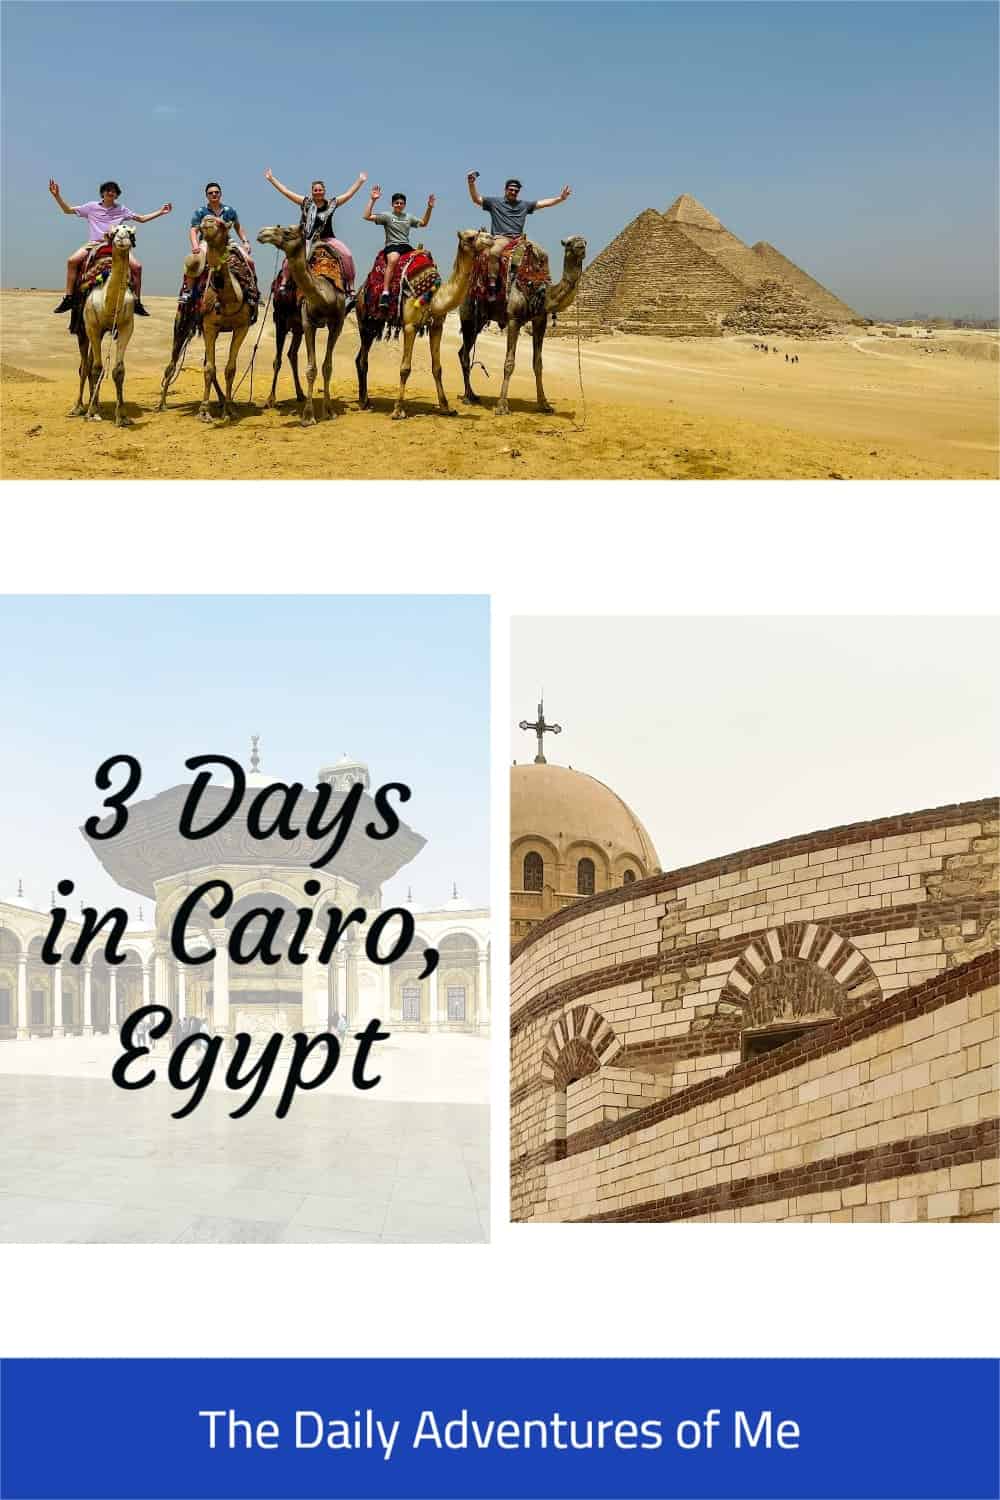 Read on to help plan your bucket list trip to Cairo, Egypt! Don't let any more time go by before you plan. #Egptiantravel #CairoEgypt #travel